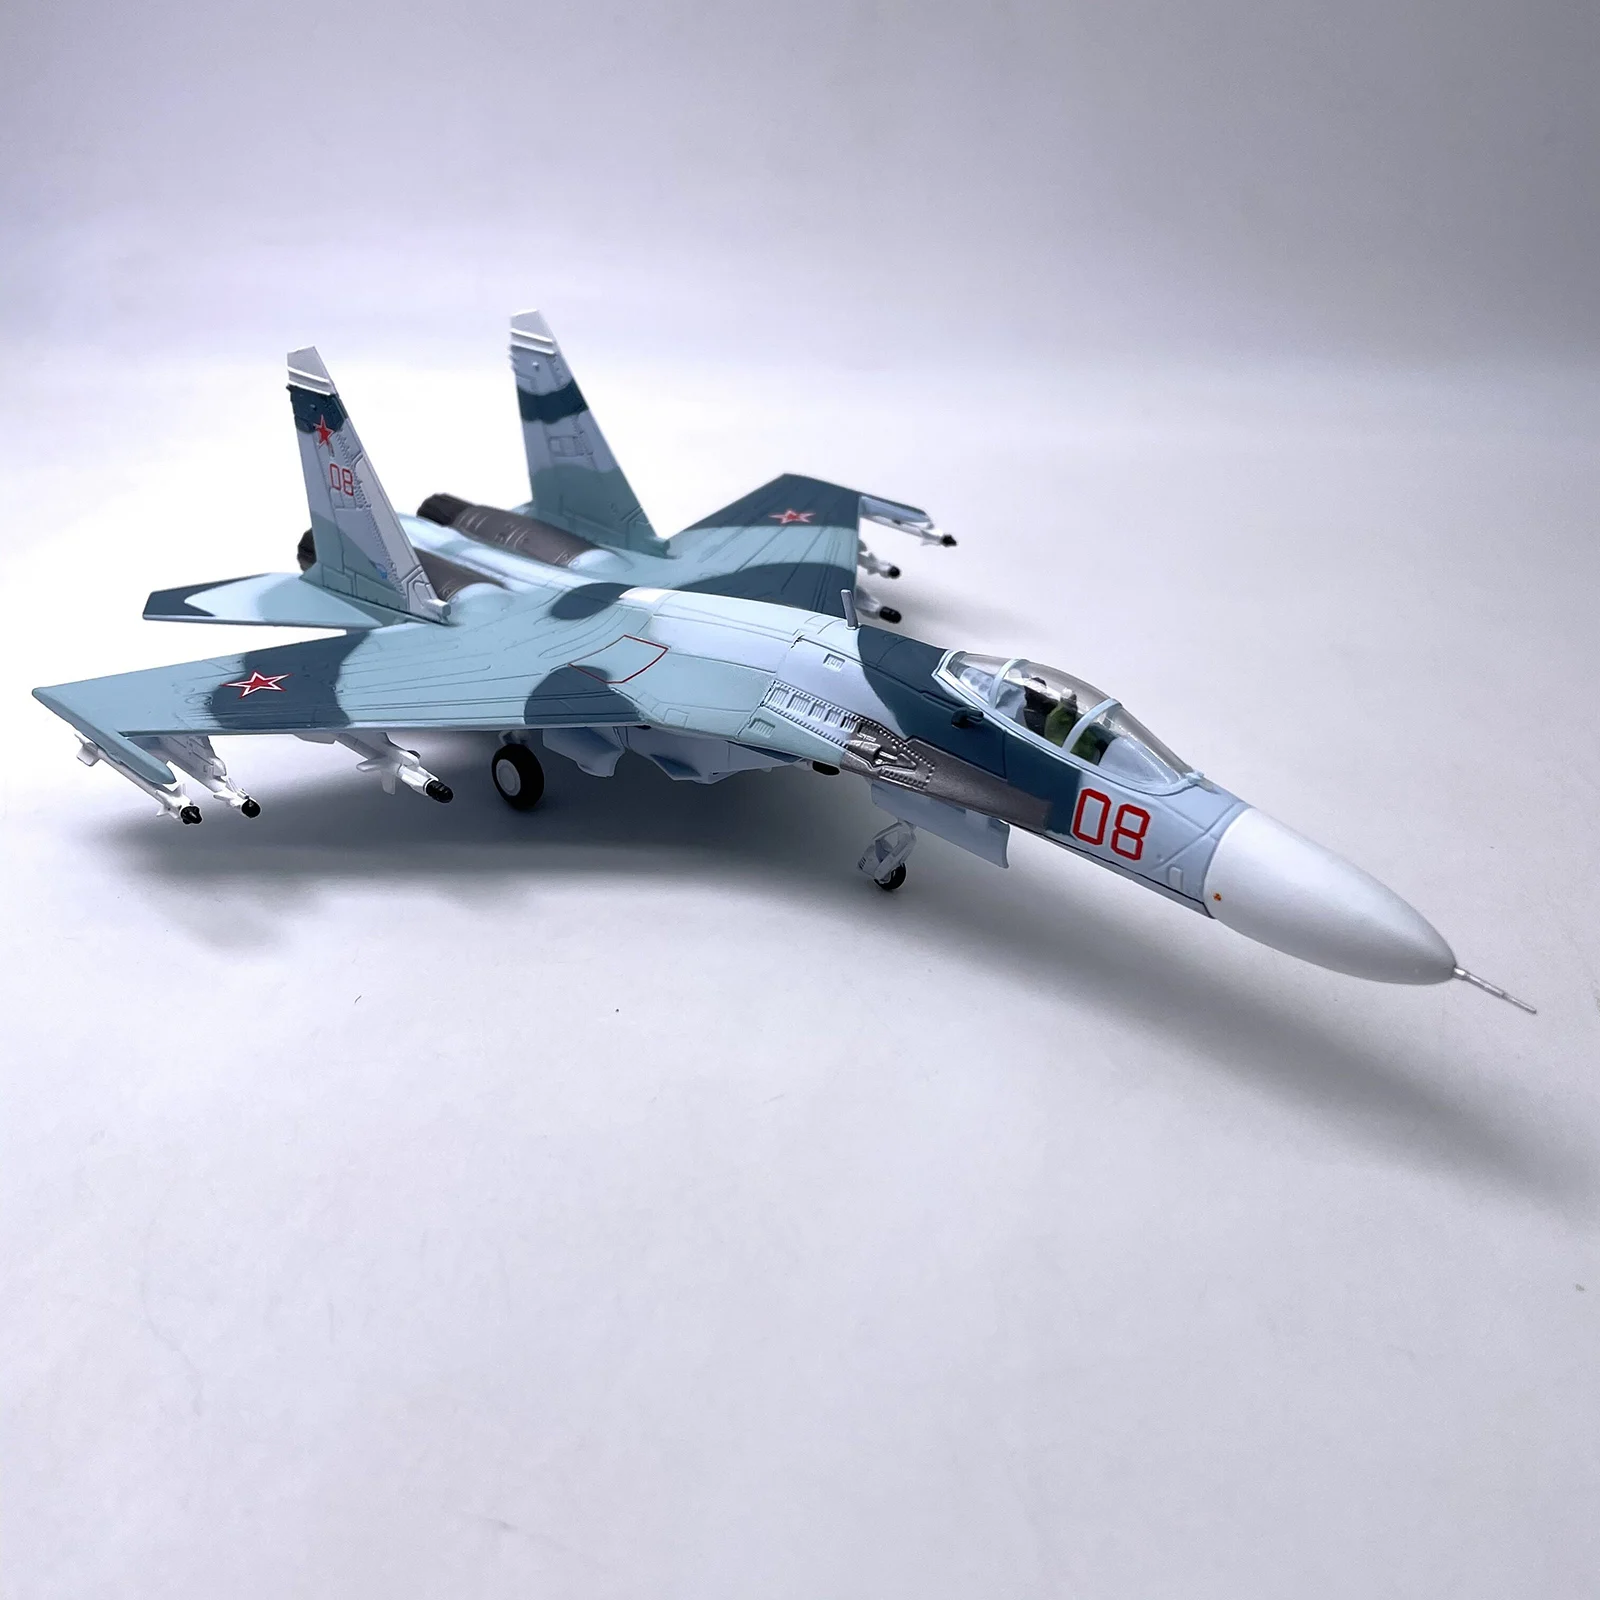 Details about   Diecast 1/100 Toy Gift Air 1976-Russian Sukhoi Su-27 Airplane 